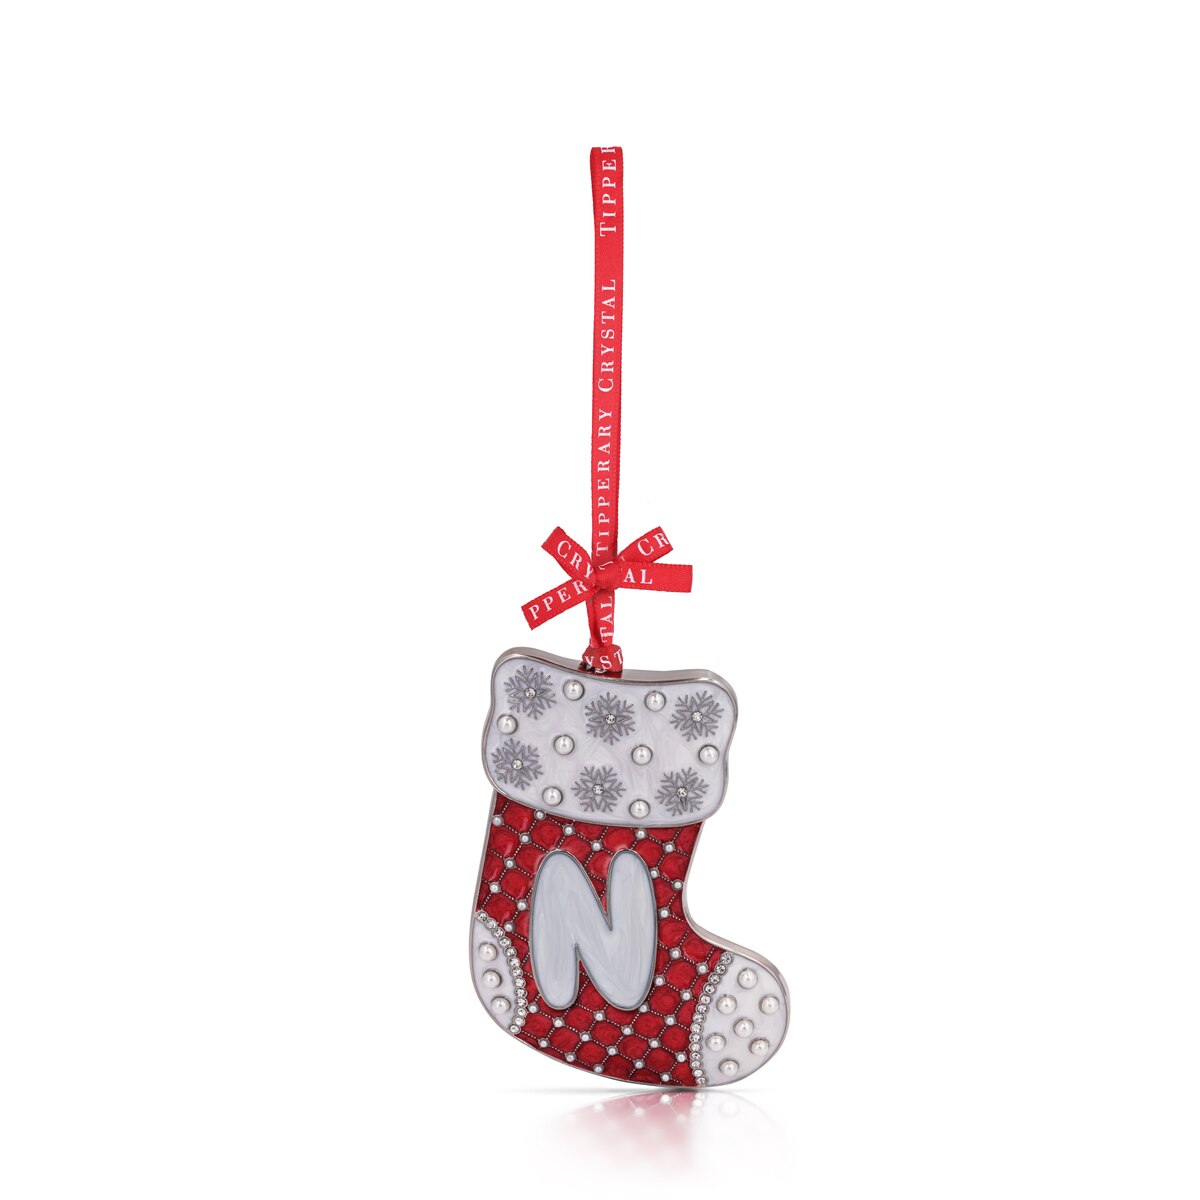 Tipperary Crystal Alphabet Stocking Christmas Decoration - N - Last chance to buy